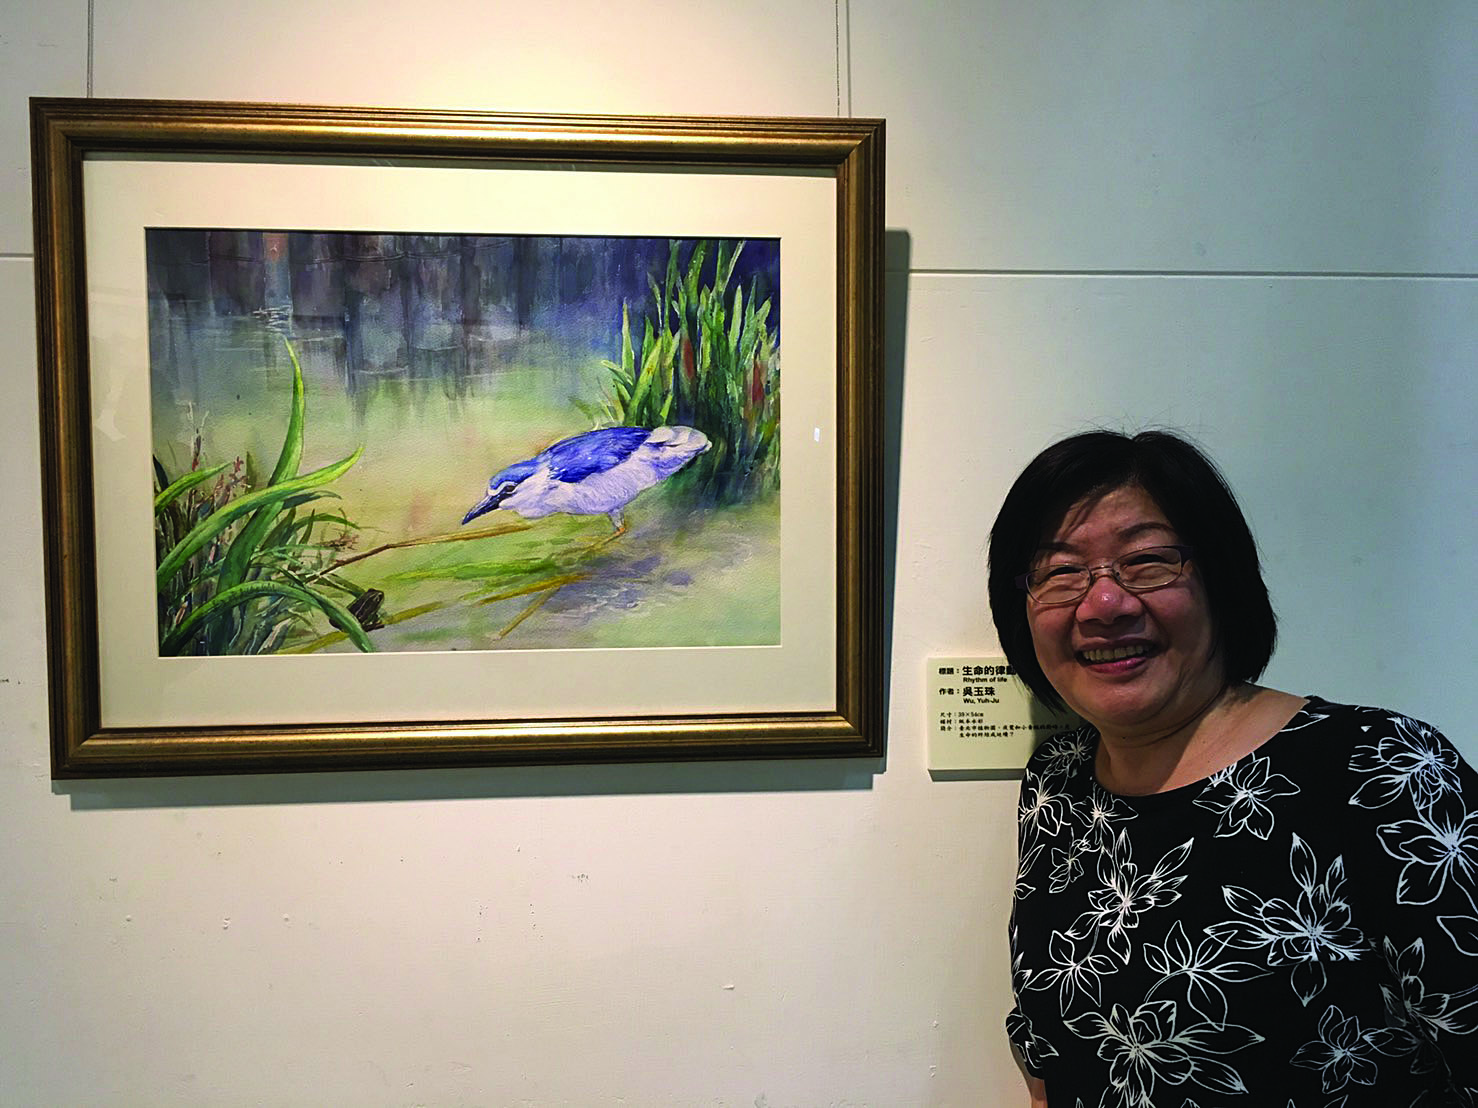 Award-winning artist Judy Wu pictured with her watercolor painting